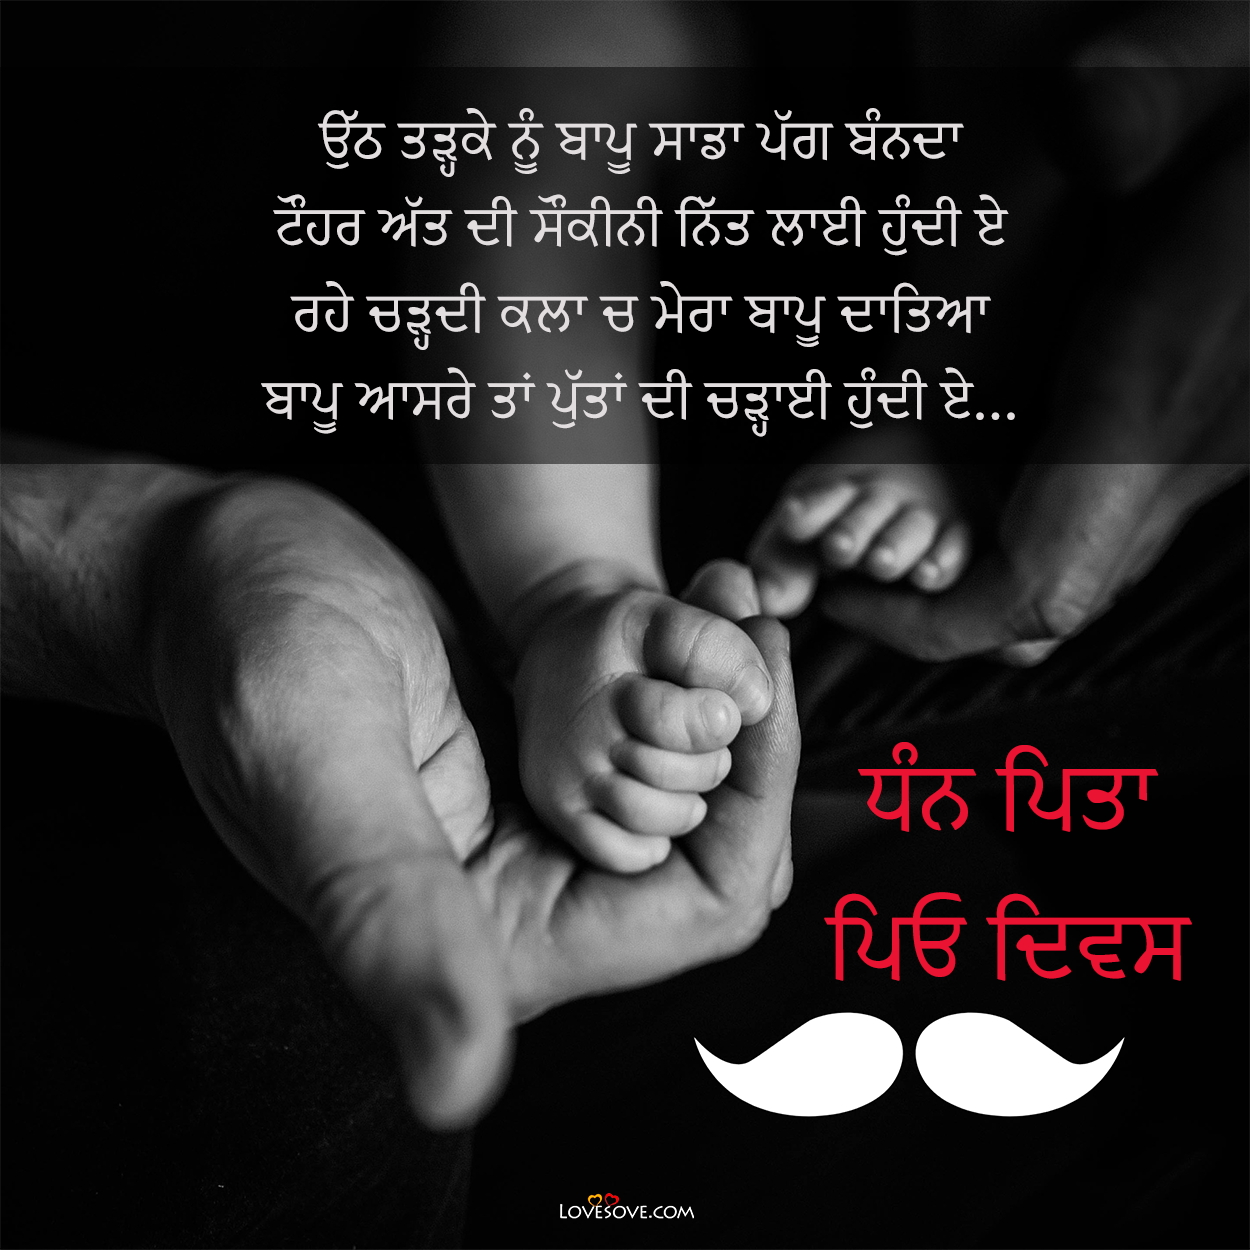 father's day quotes in punjabi, happy father's day status in punjabi